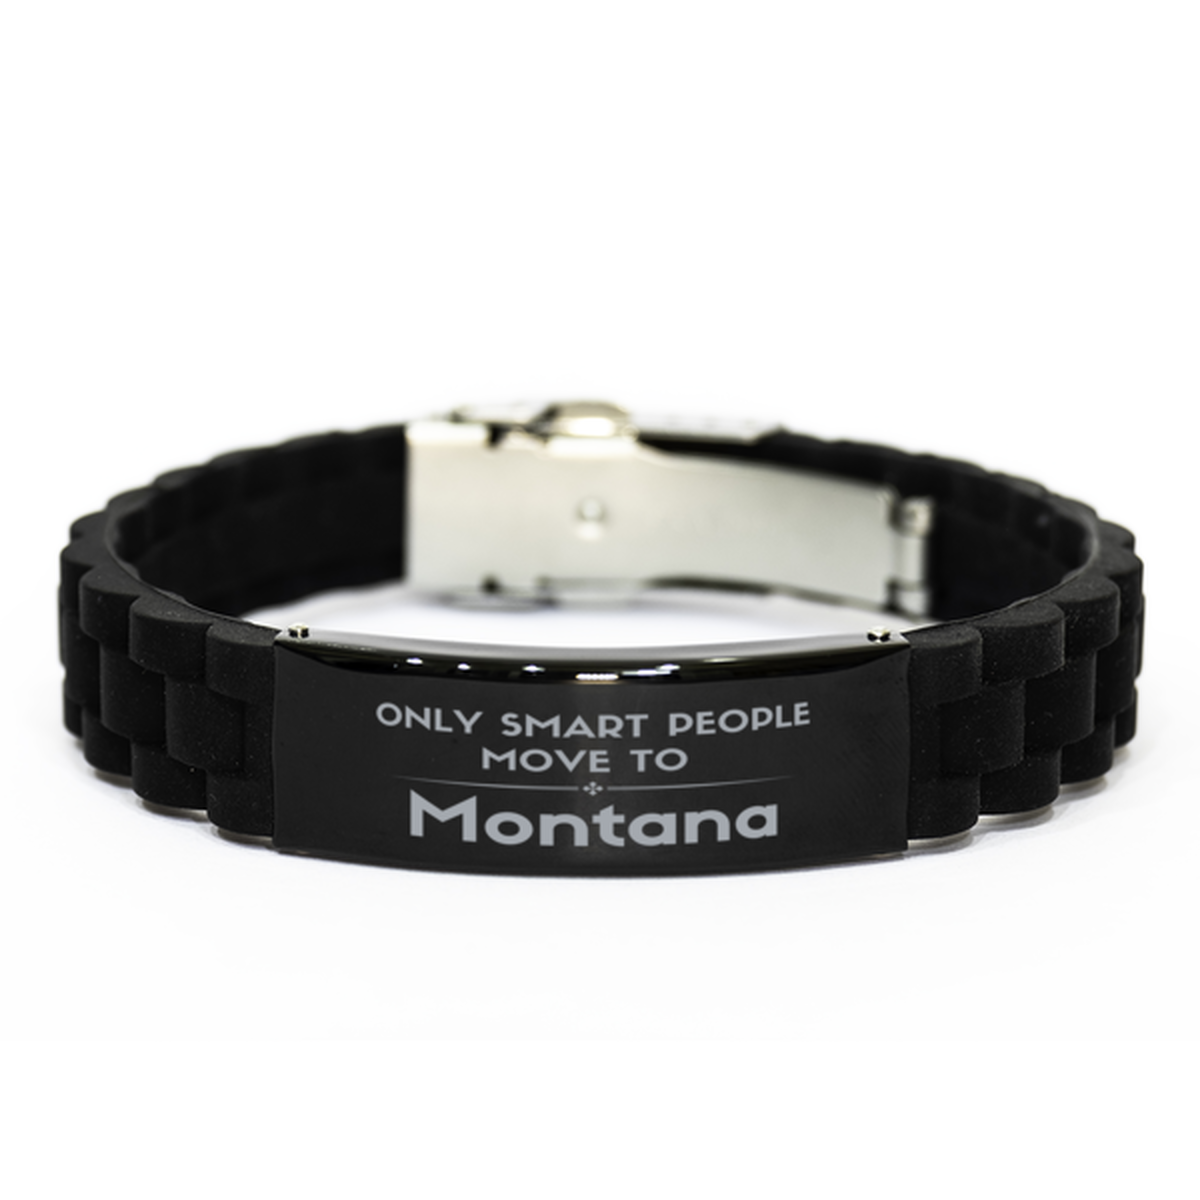 Only smart people move to Montana Black Glidelock Clasp Bracelet, Gag Gifts For Montana, Move to Montana Gifts for Friends Coworker Funny Saying Quote